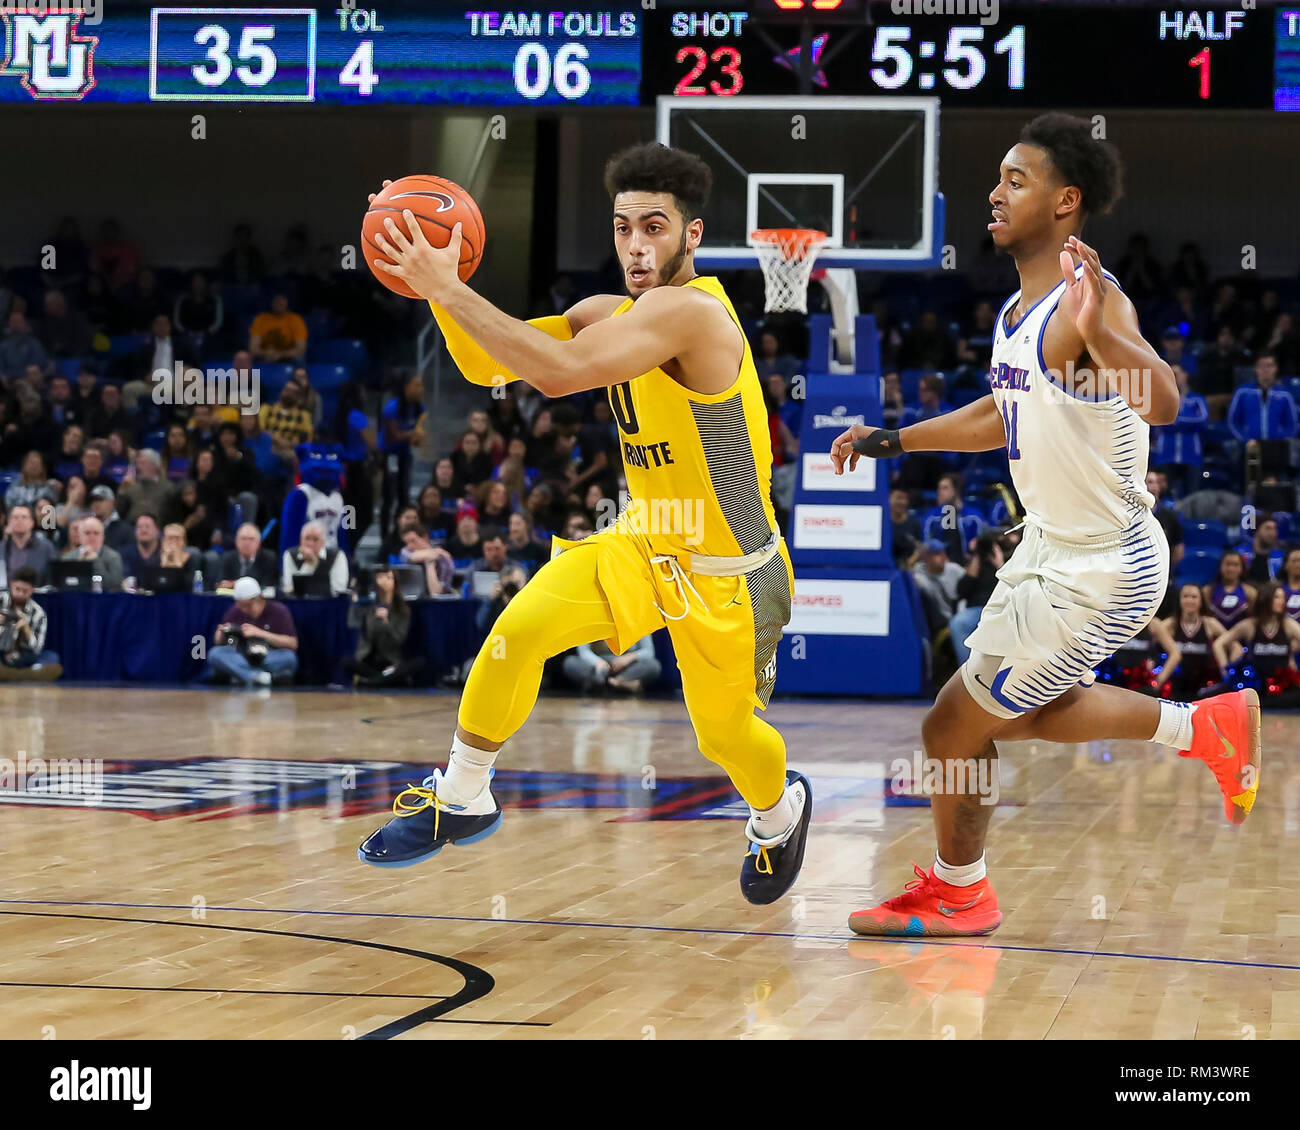 Chicago, USA. 12th Feb 2019. Marquette Golden Eagles guard Markus Howard (0) drives from the top of the key past the defense of DePaul Blue Demons guard Eli Cain (11) during NCAA basketball game between the Marquette Golden Eagles and the DePaul University Blue Demons at Wintrust Arena in Chicago IL. Gary E. Duncan Sr/CSM Credit: Cal Sport Media/Alamy Live News Stock Photo